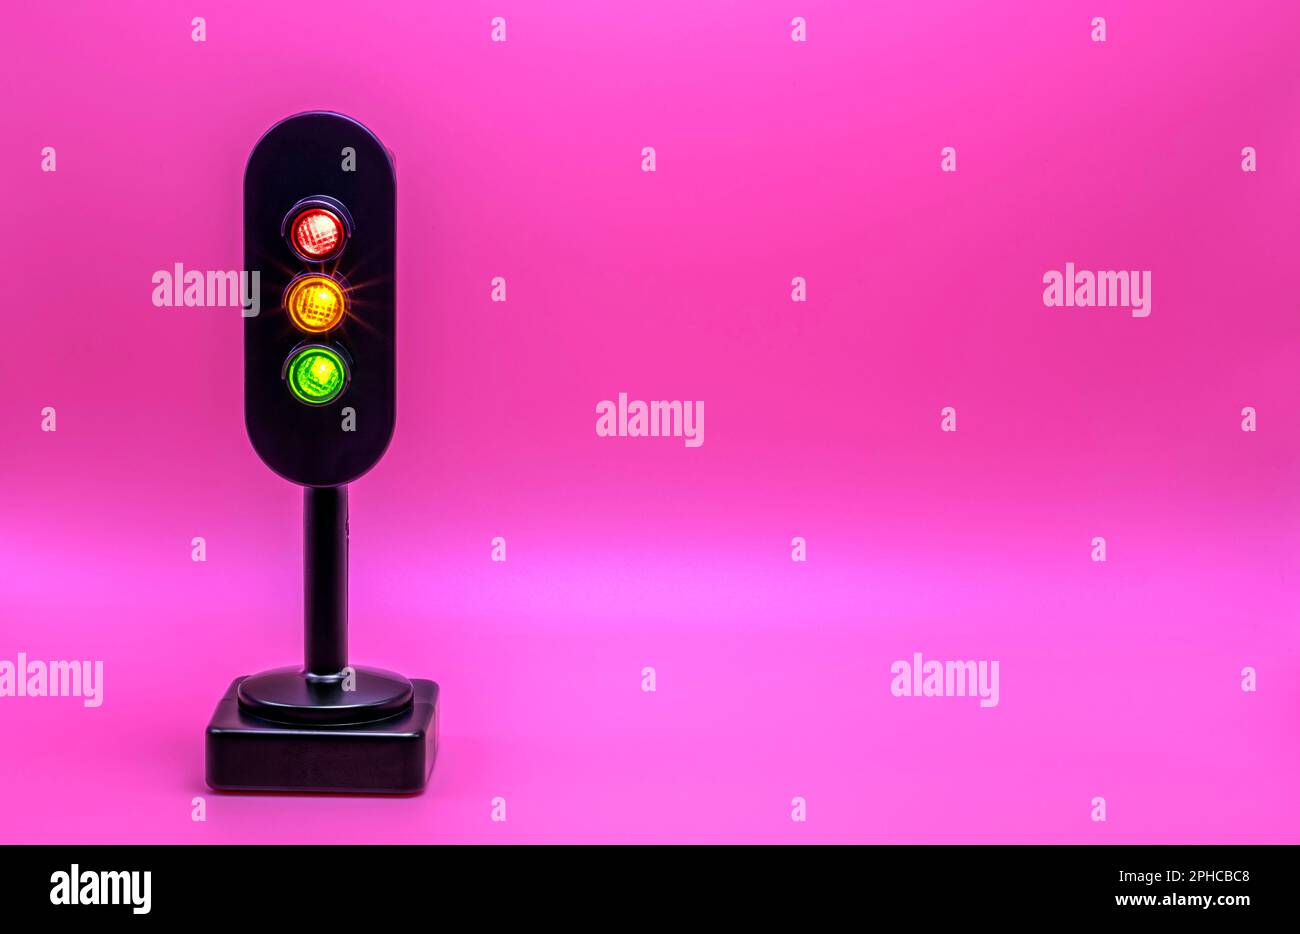 Miniature traffic light with red, orange and green light on. Studio shot. Pink empty background. Stock Photo